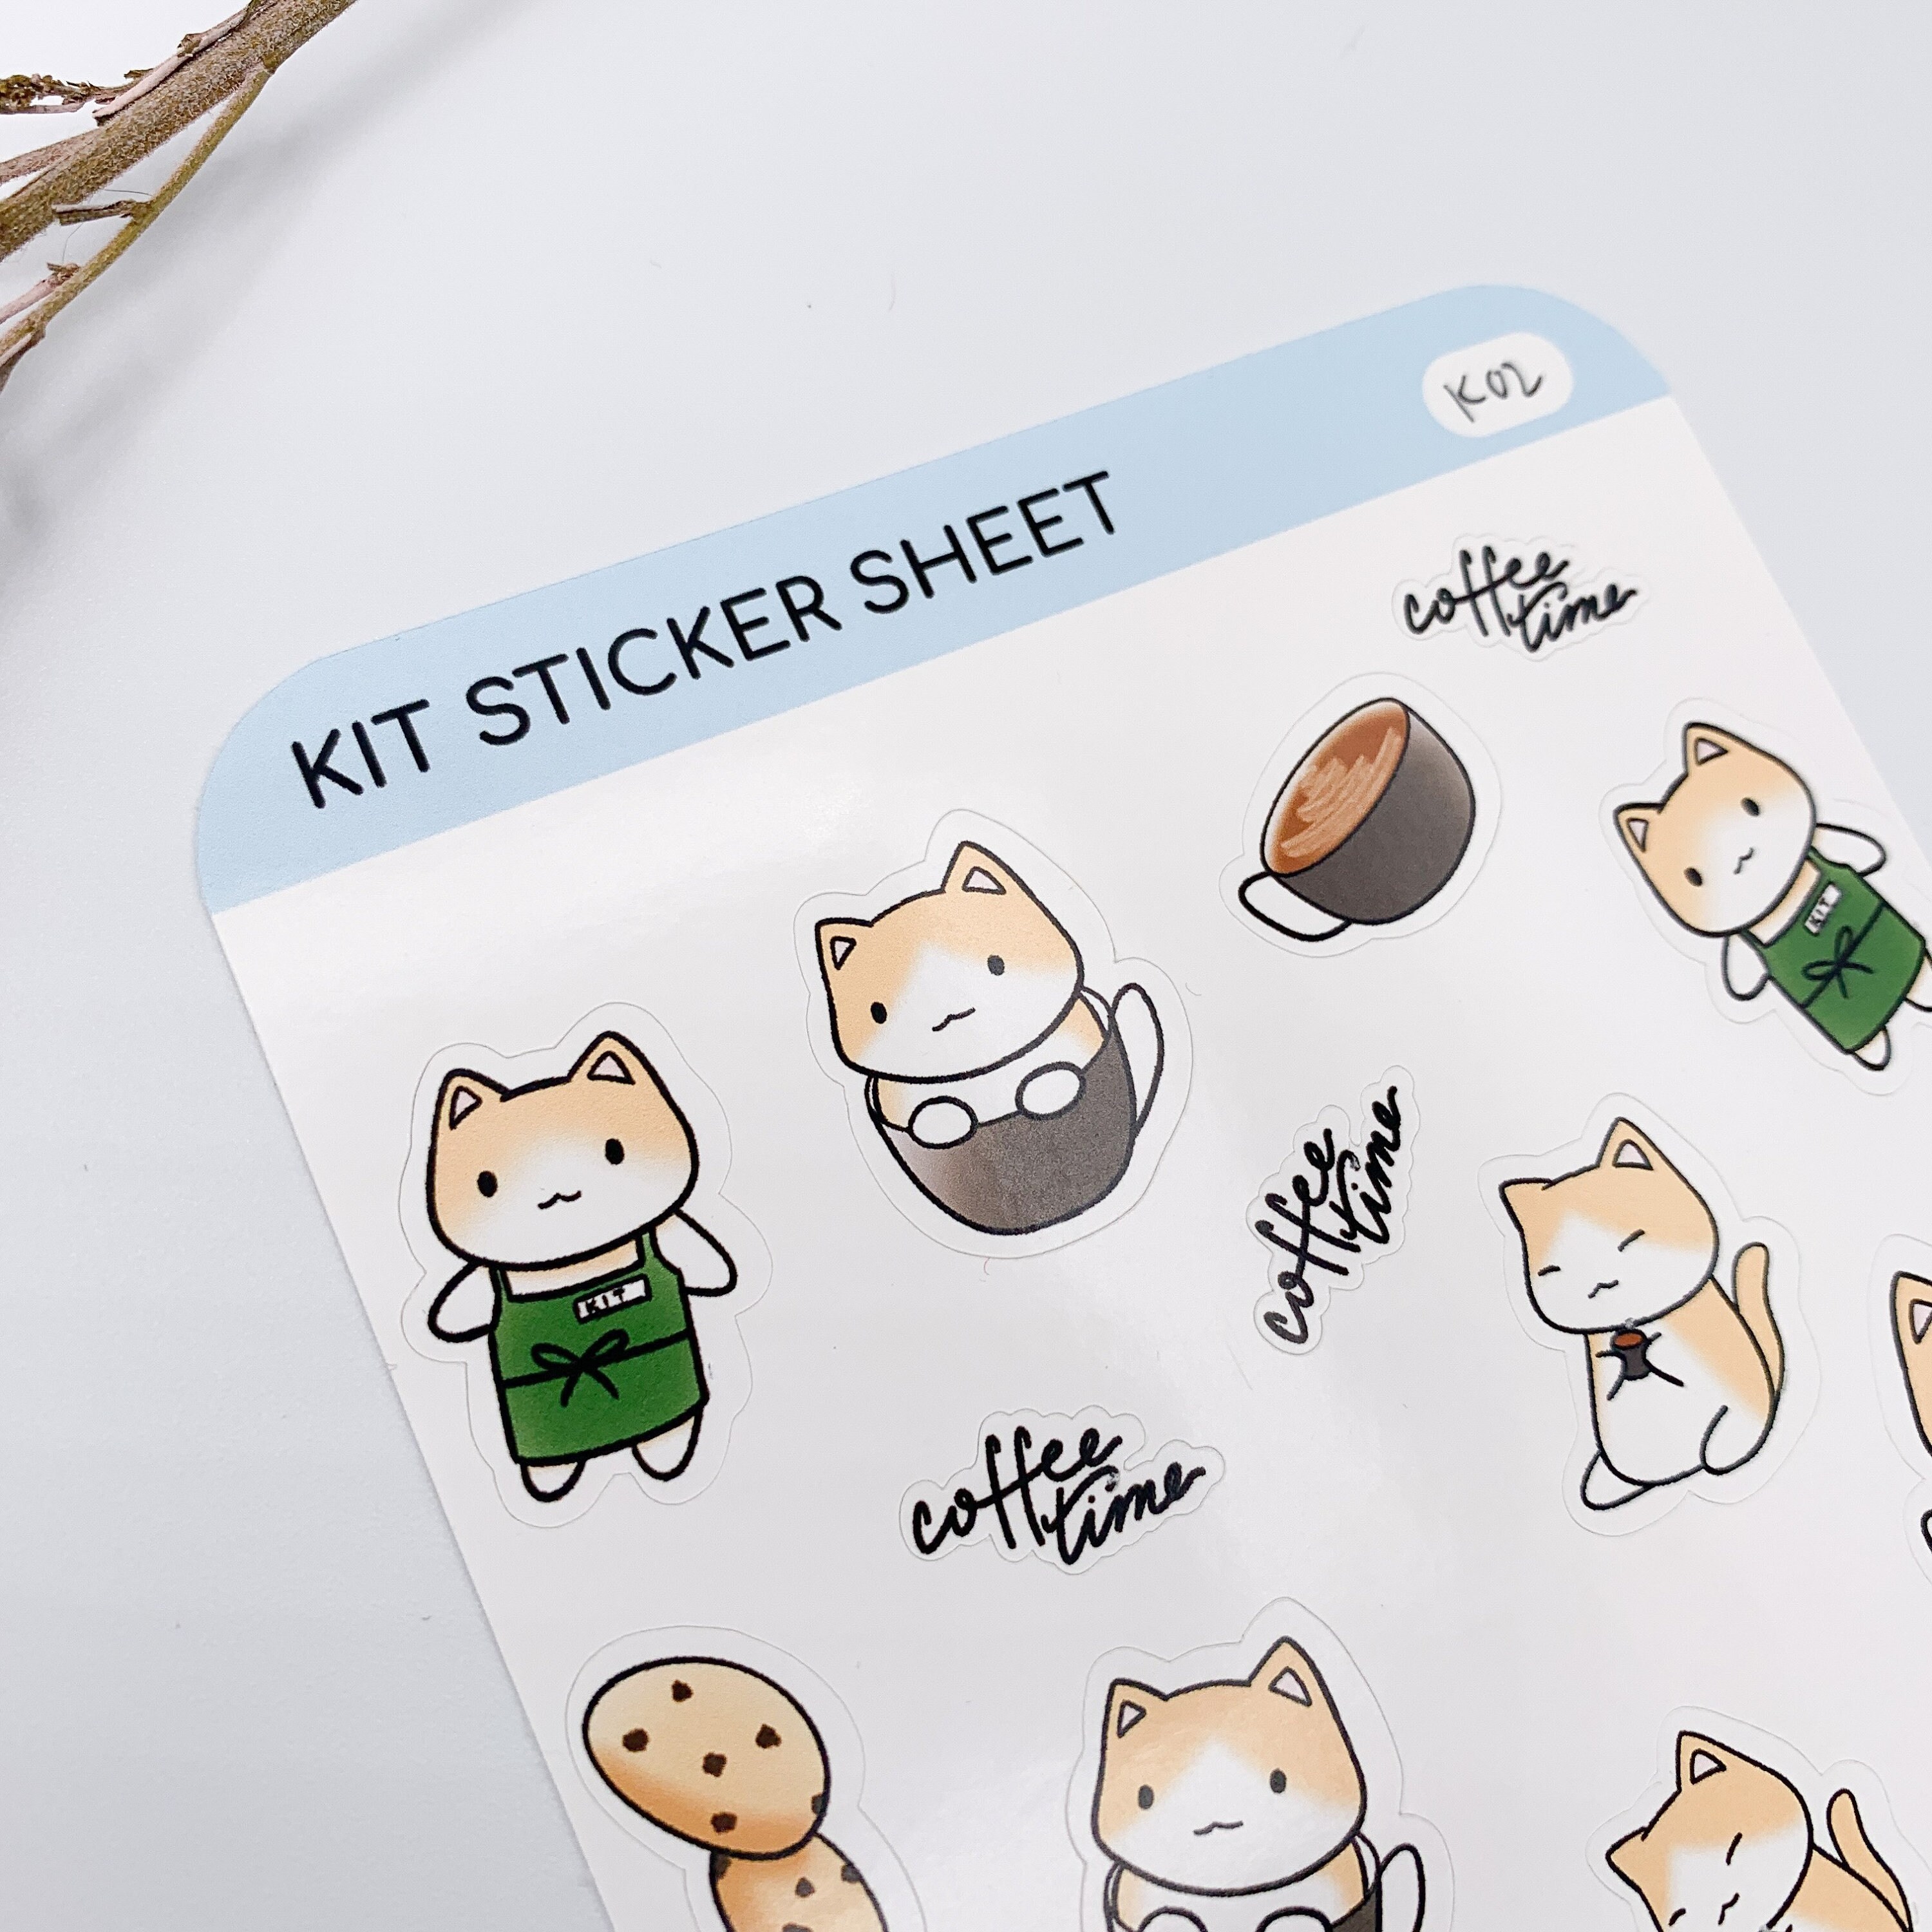 K9-kit Label, Planner Labels, Name Labels, Cute Planner Stickers